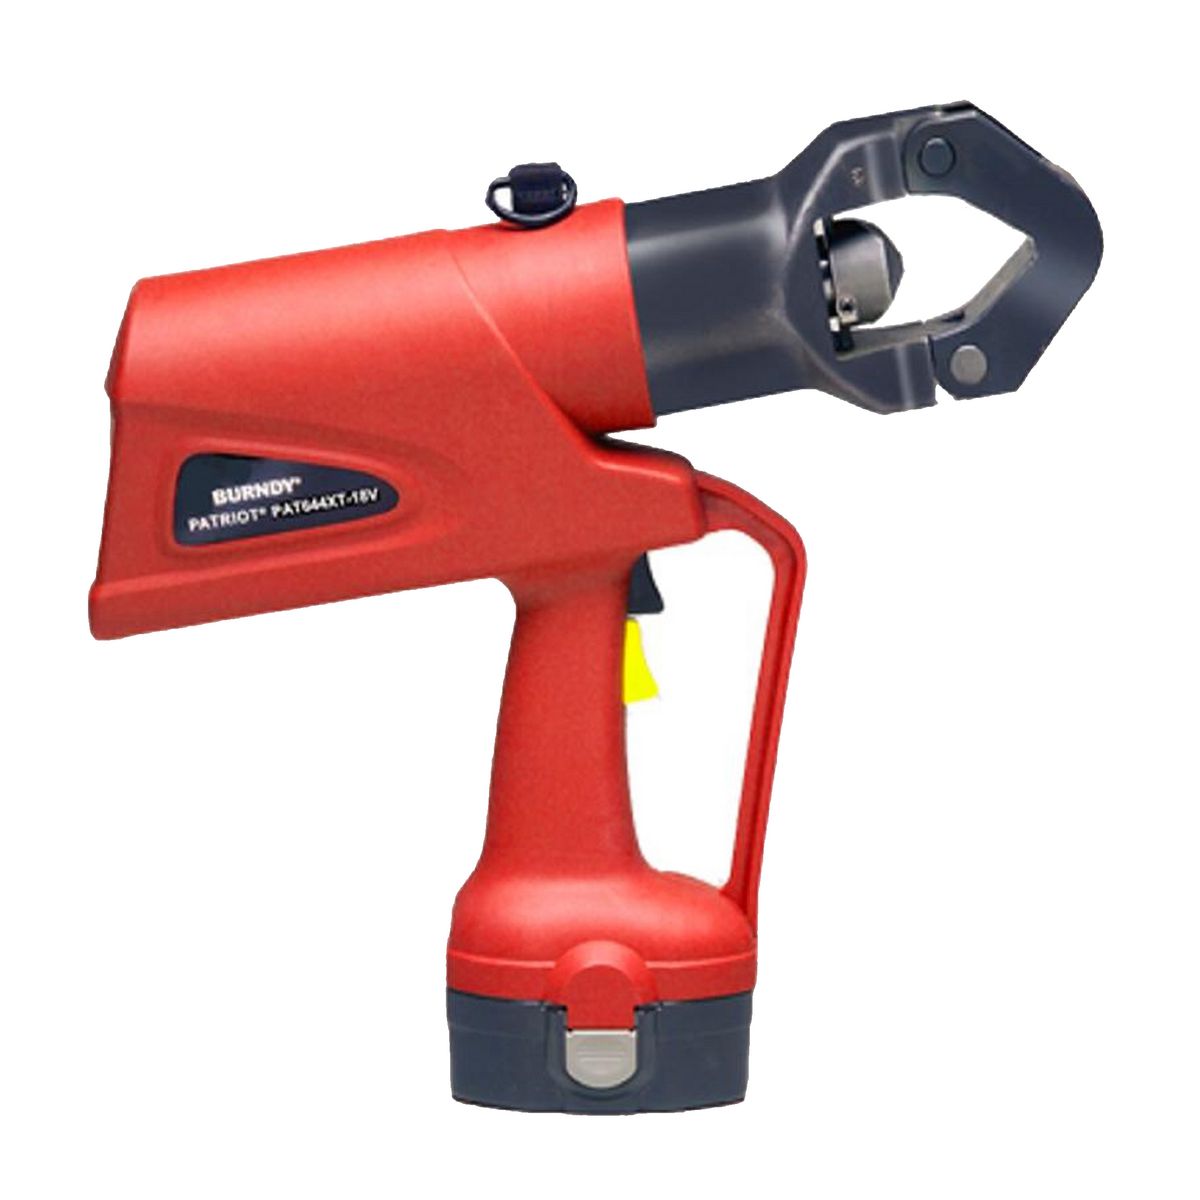 BATTERY ACTUATED DIELESS CRIMPING TOOL